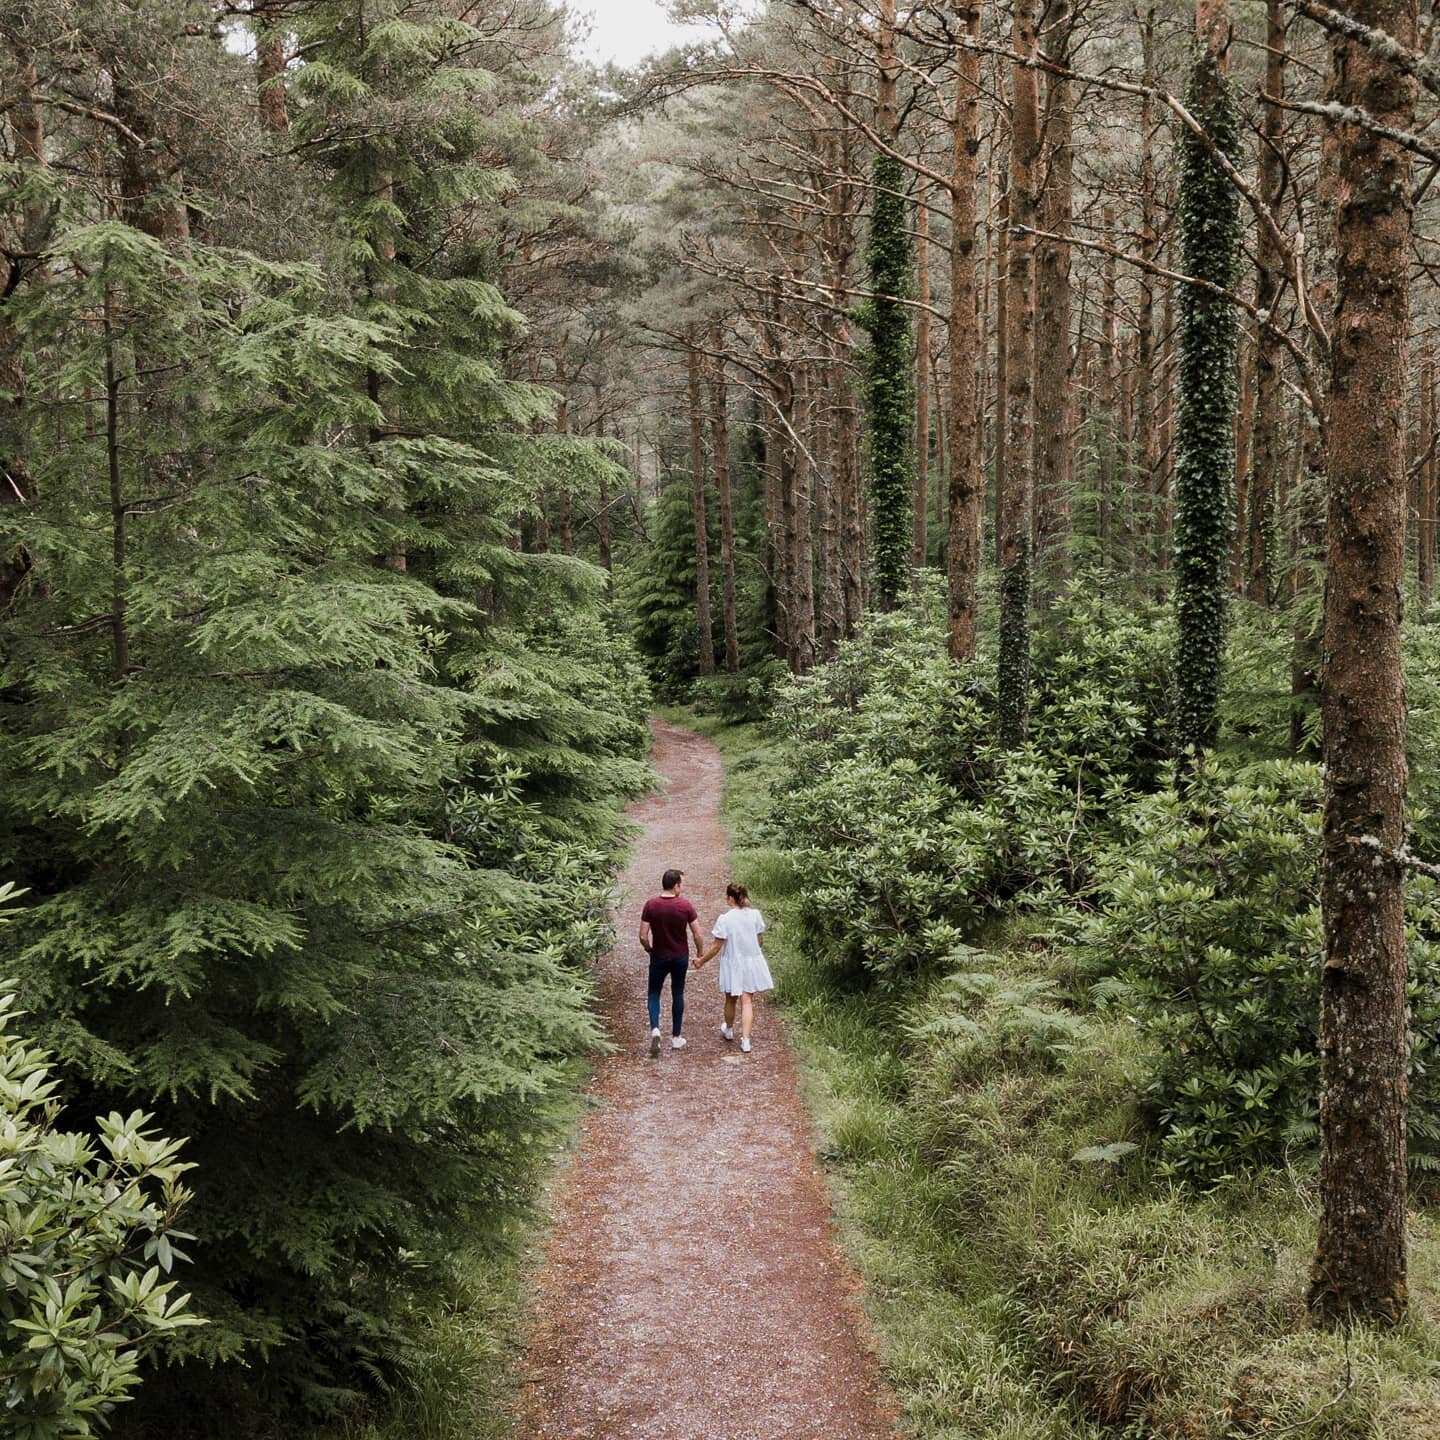 Mairead &amp; Luke during their engagement shoot in the beautiful @killarneynationalpark

#irishwedding #irishbride #killarneynationalpark #kerrywedding